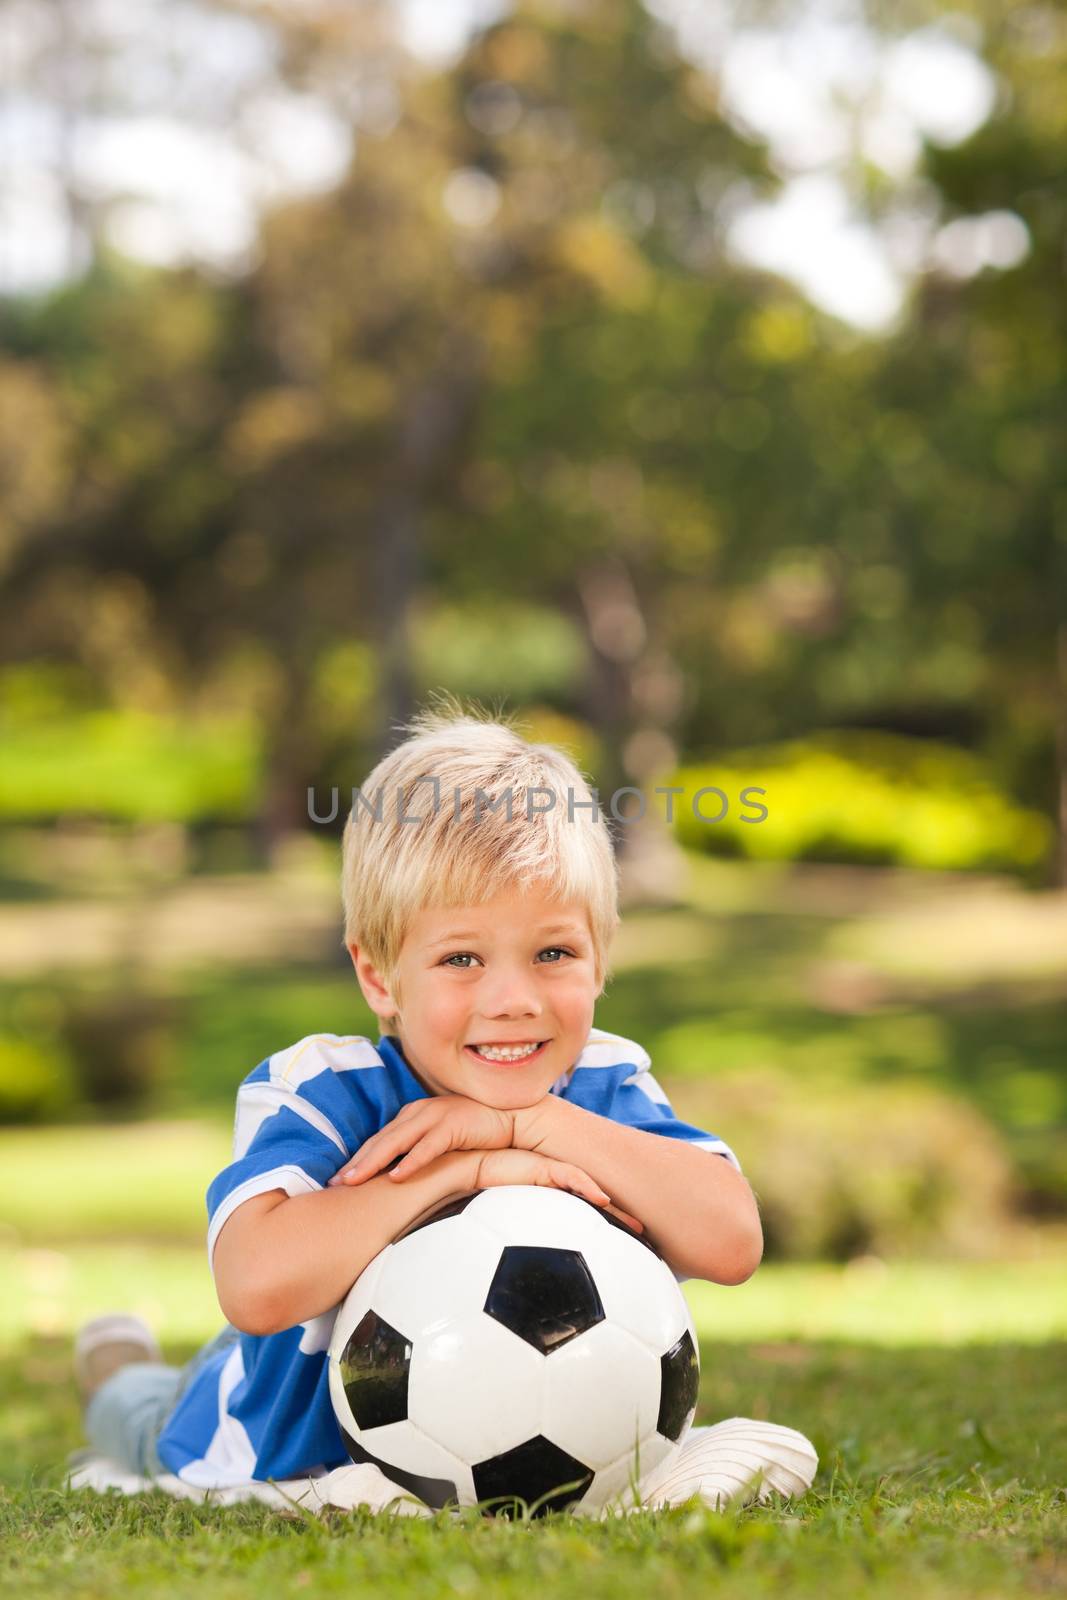 Boy with his ball in the park by Wavebreakmedia